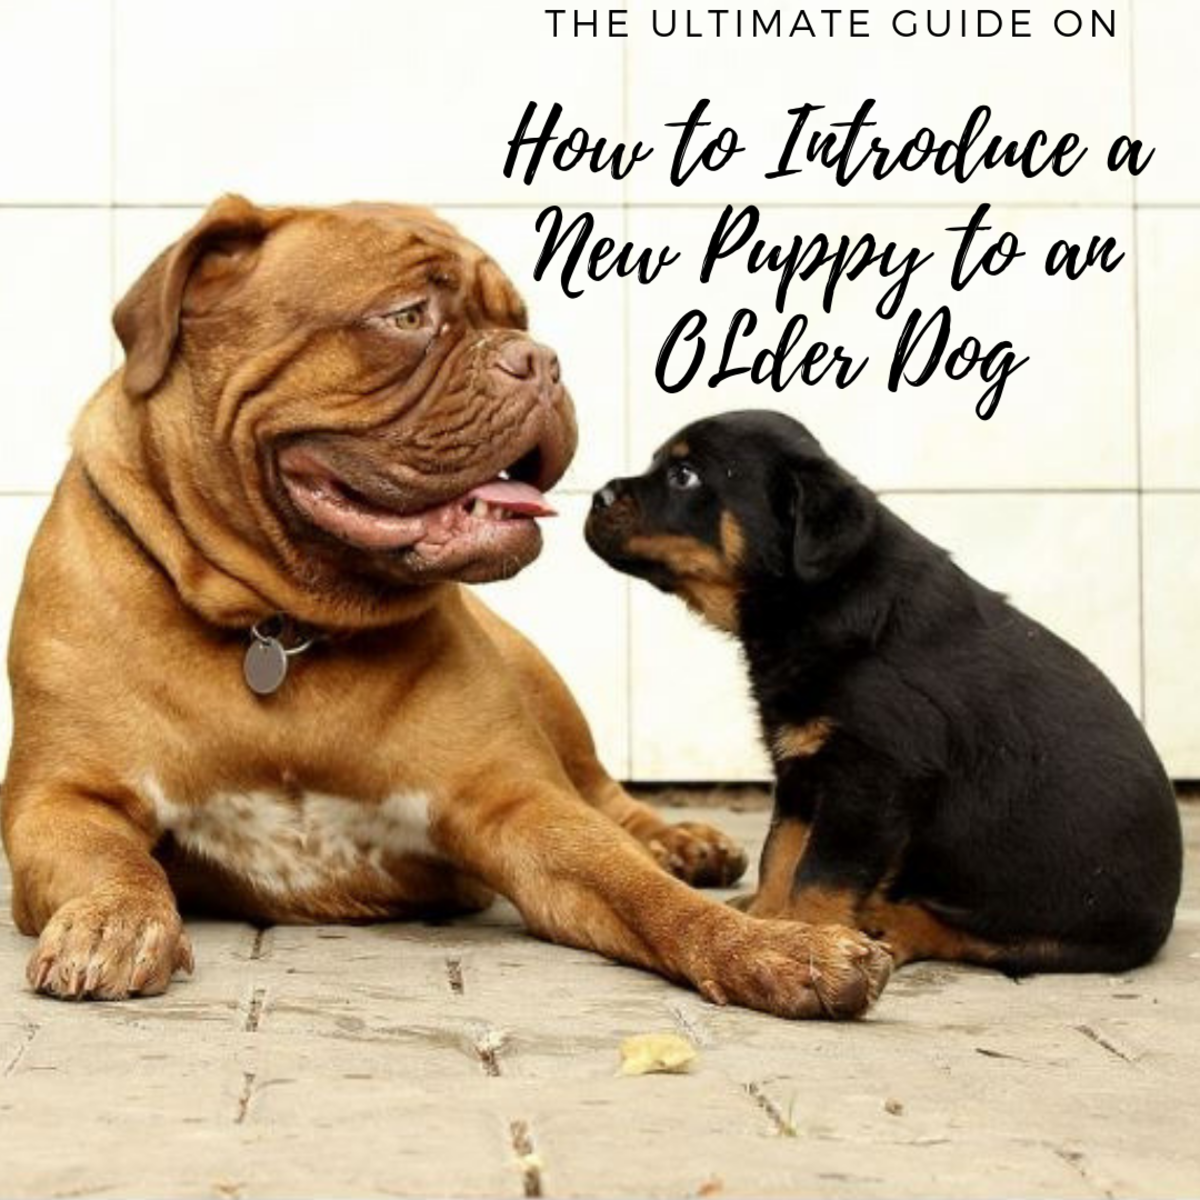 How to introduce an old dog to a new dog 10 Tips For Introducing A New Puppy To An Older Dog Pethelpful By Fellow Animal Lovers And Experts